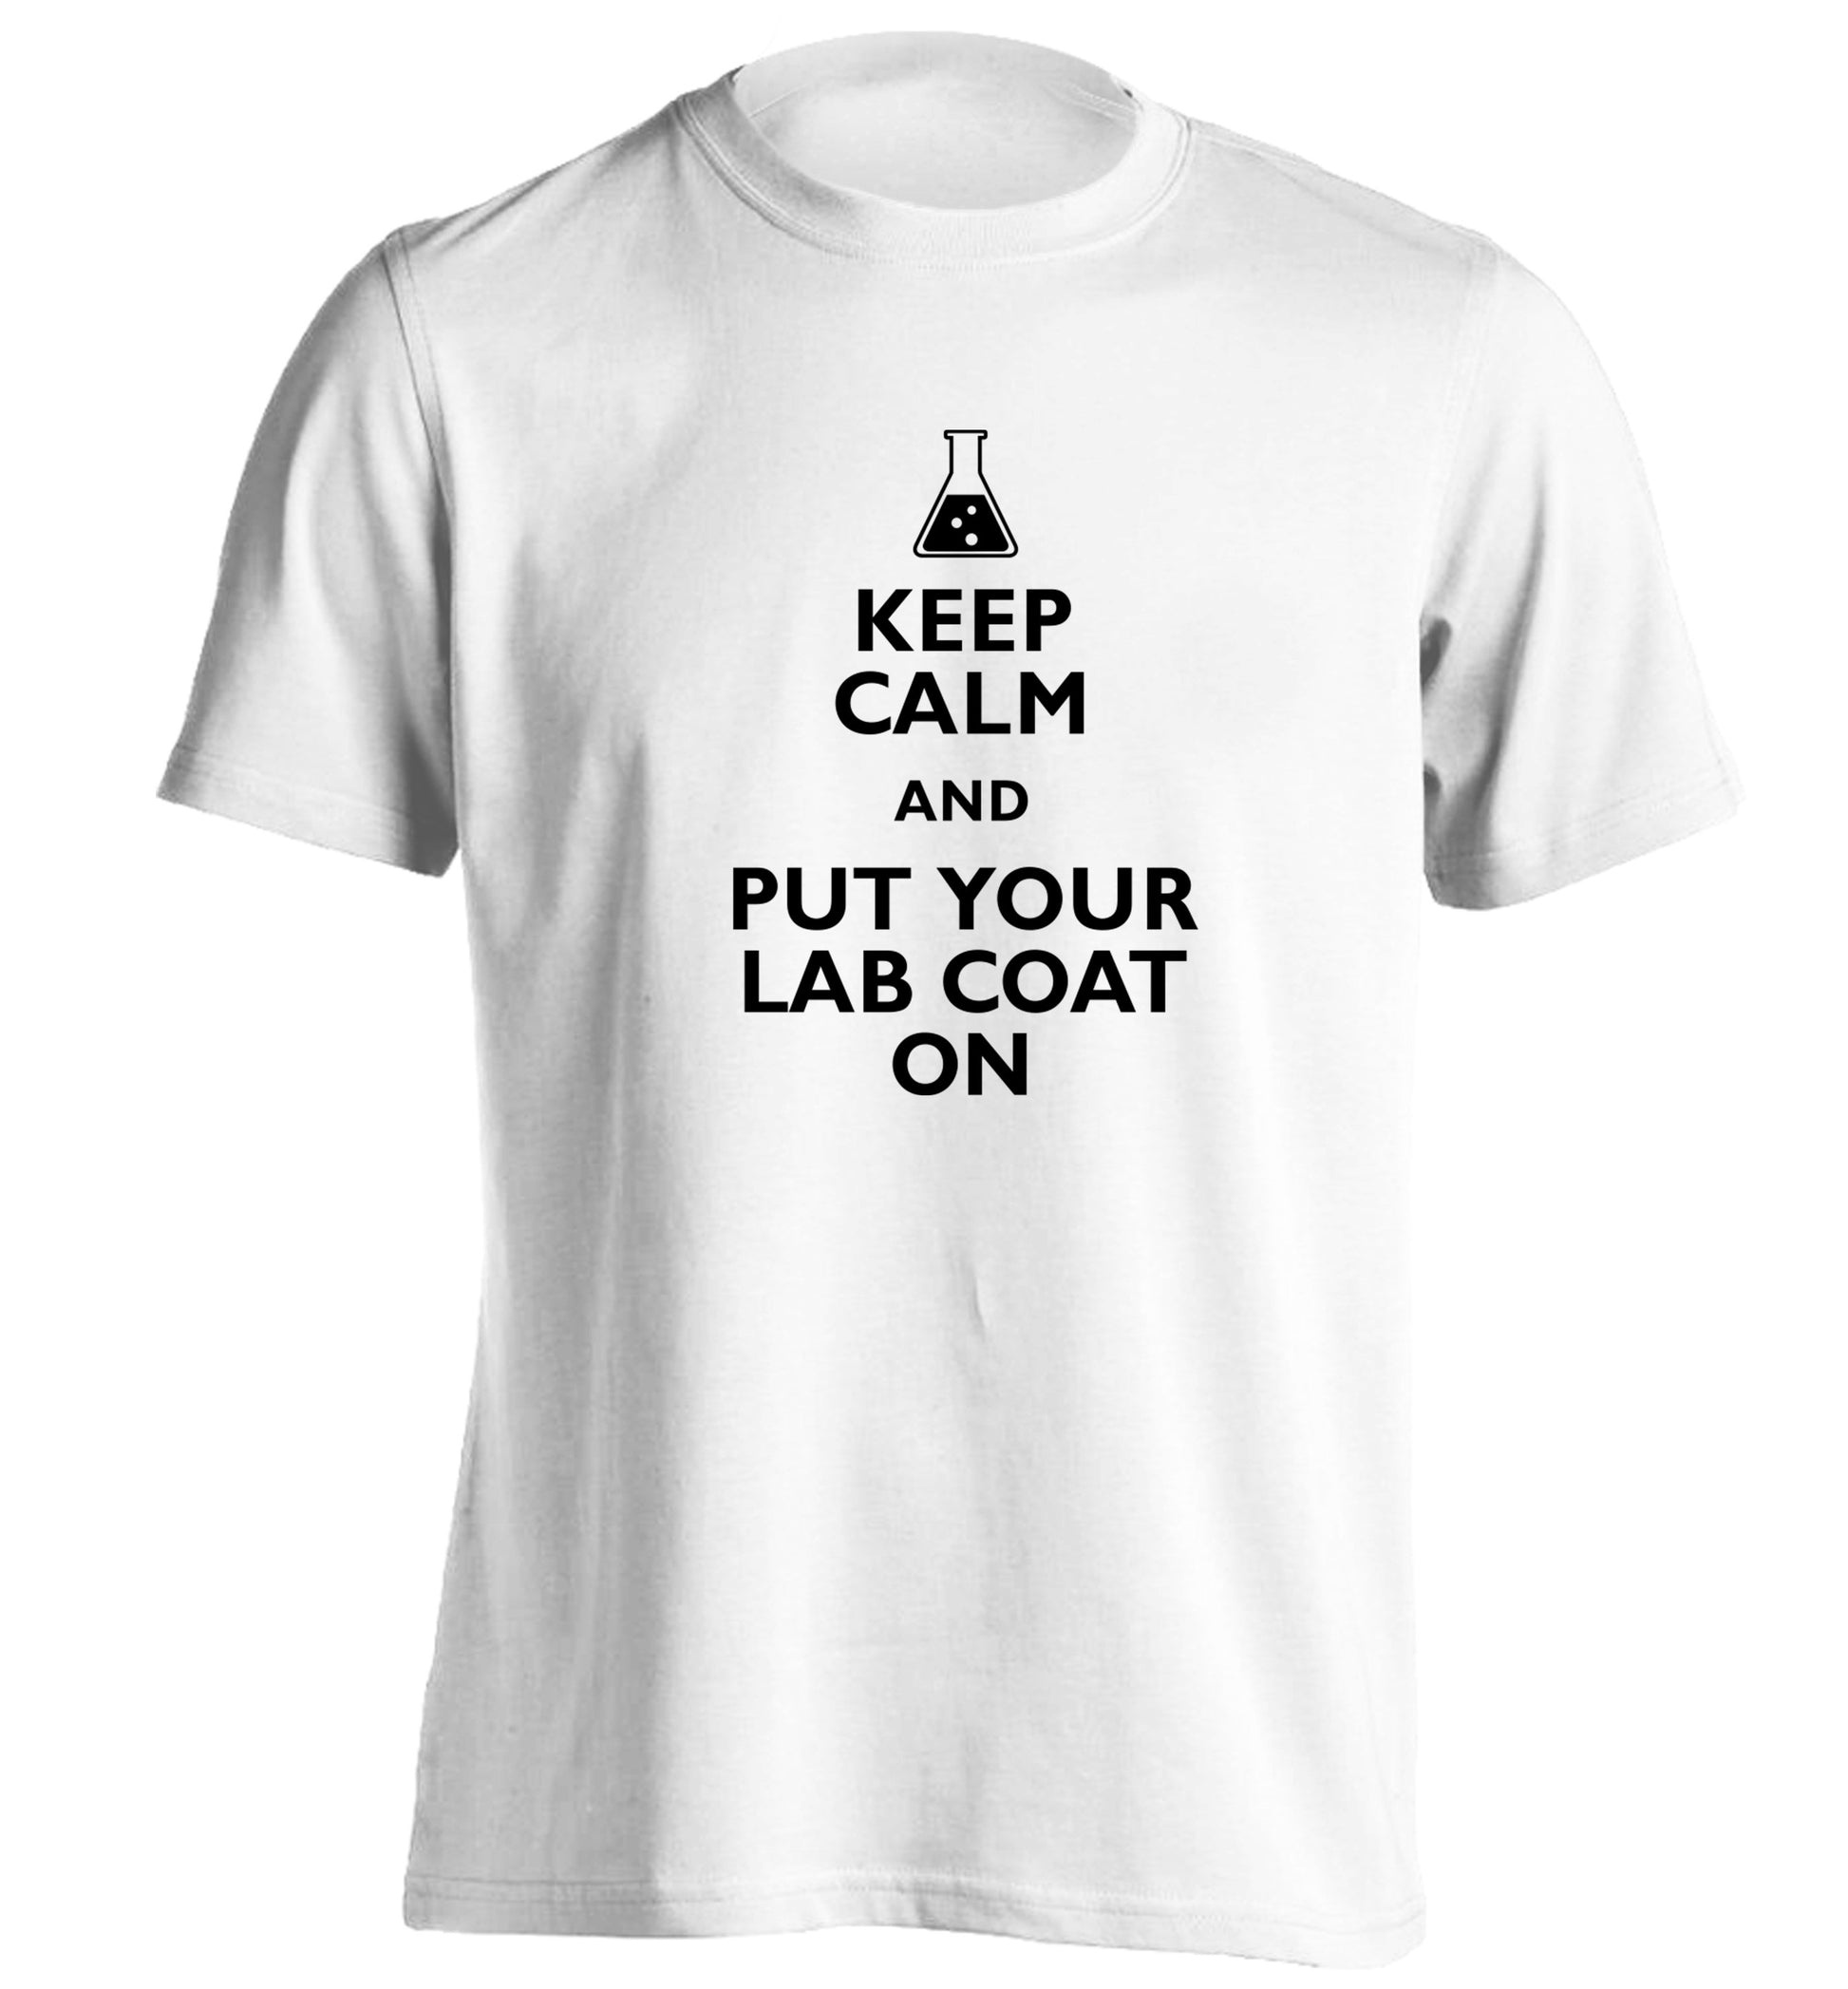 Keep calm and put your lab coat on adults unisex white Tshirt 2XL